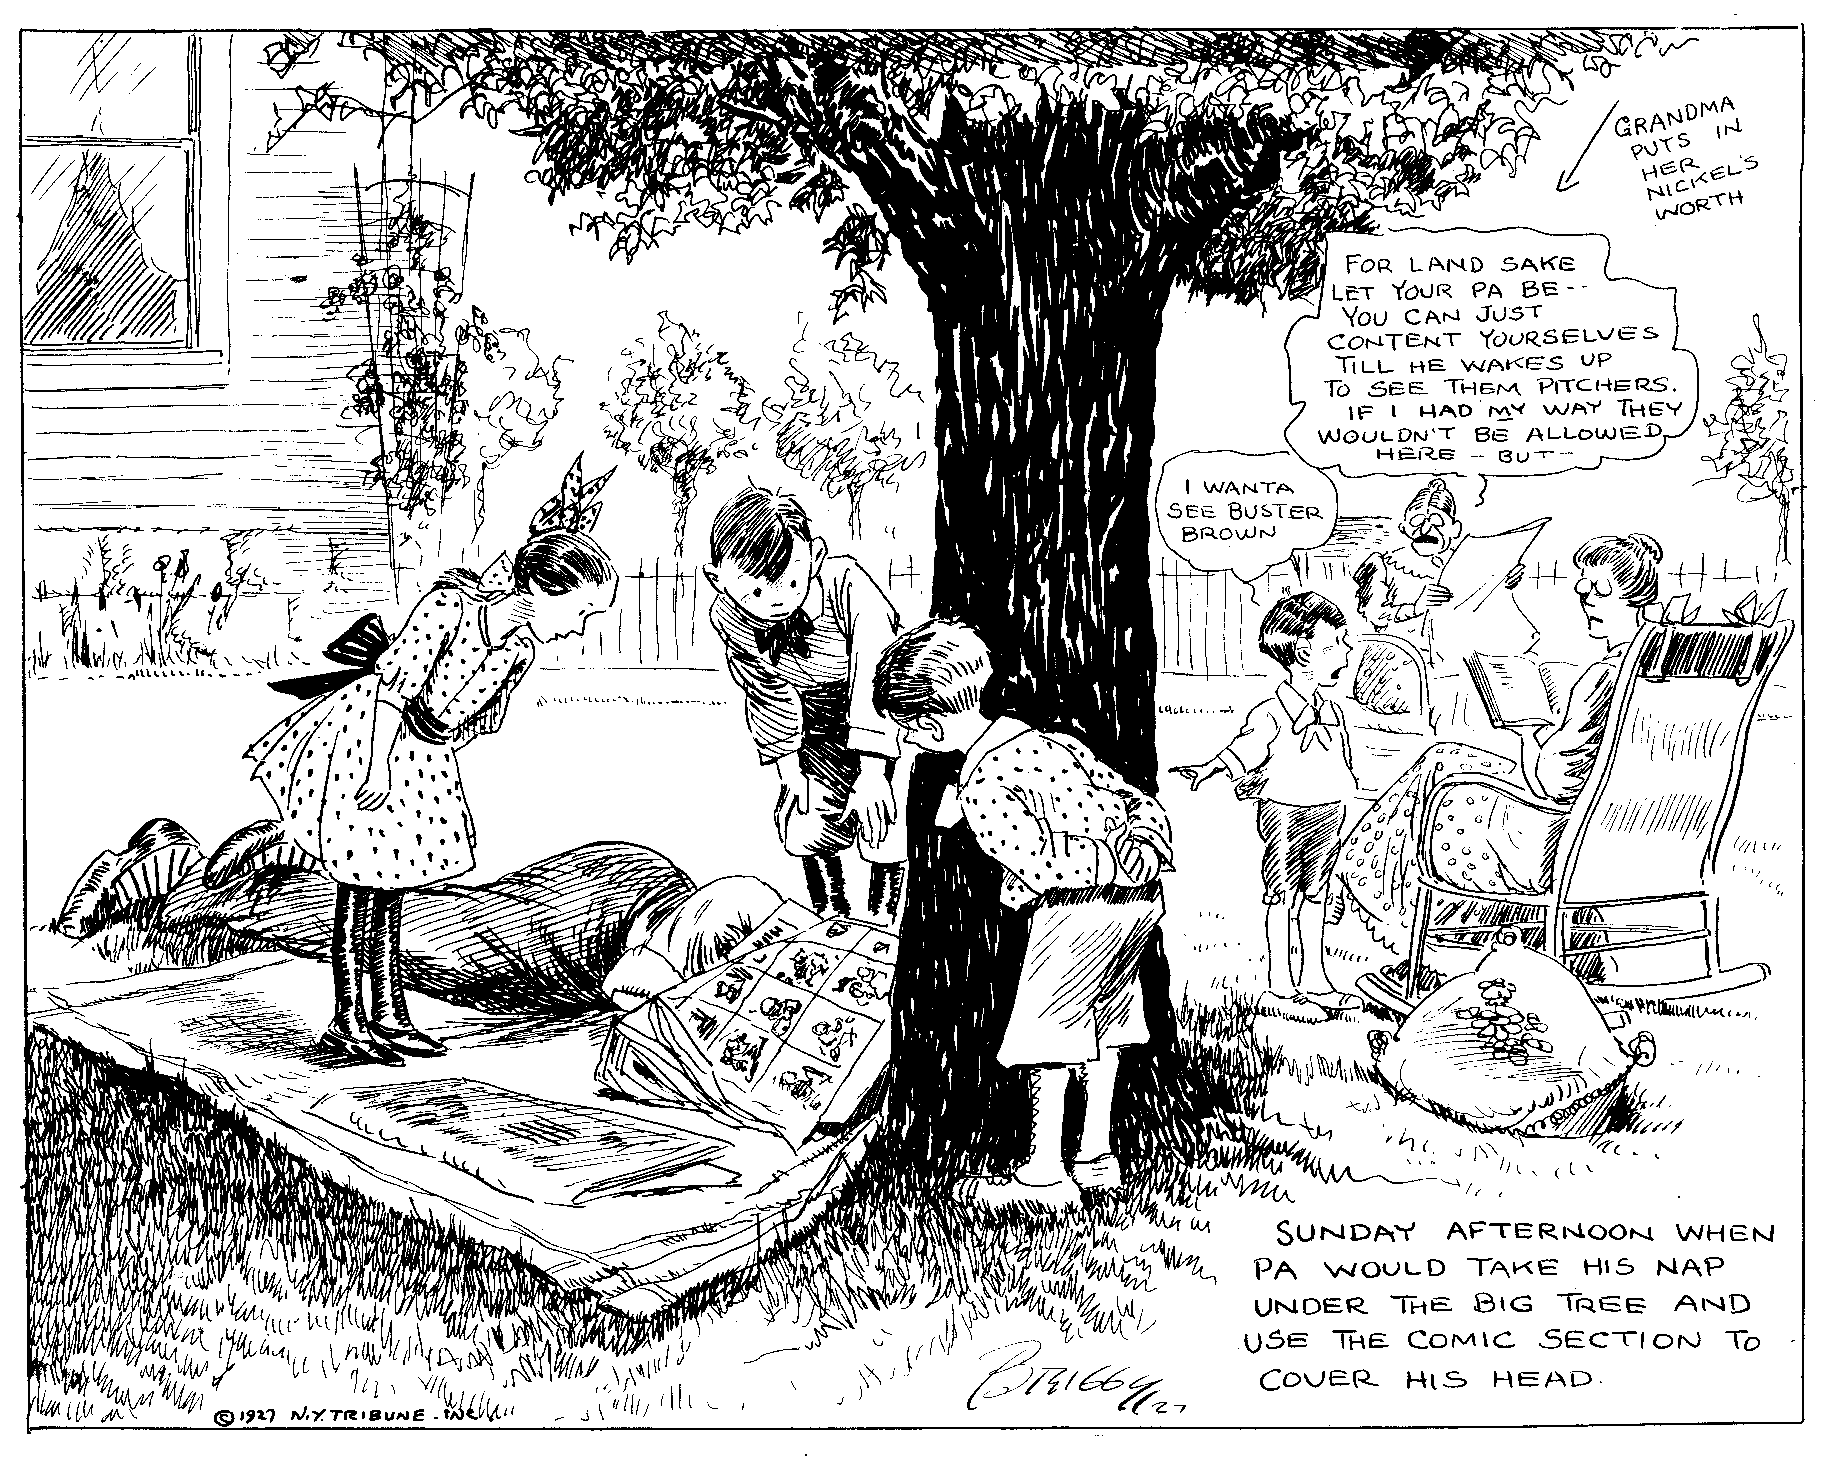 Although the first daily strip is sometimes credited to Bud Fisher with his horse-betting daily “A. Mutt” (later to be known as “Mutt and Jeff”), Clare Briggs actually invented the daily comic strip for the Chicago American in 1903 with “A. Piker Clerk” which was also about horse betting; though this original drawing directly deals with the politics of the day in Chicago, it appears to make quiet reference to his groundbreaking work in its near lower right corner. (Courtesy Chicago Cultural Center)